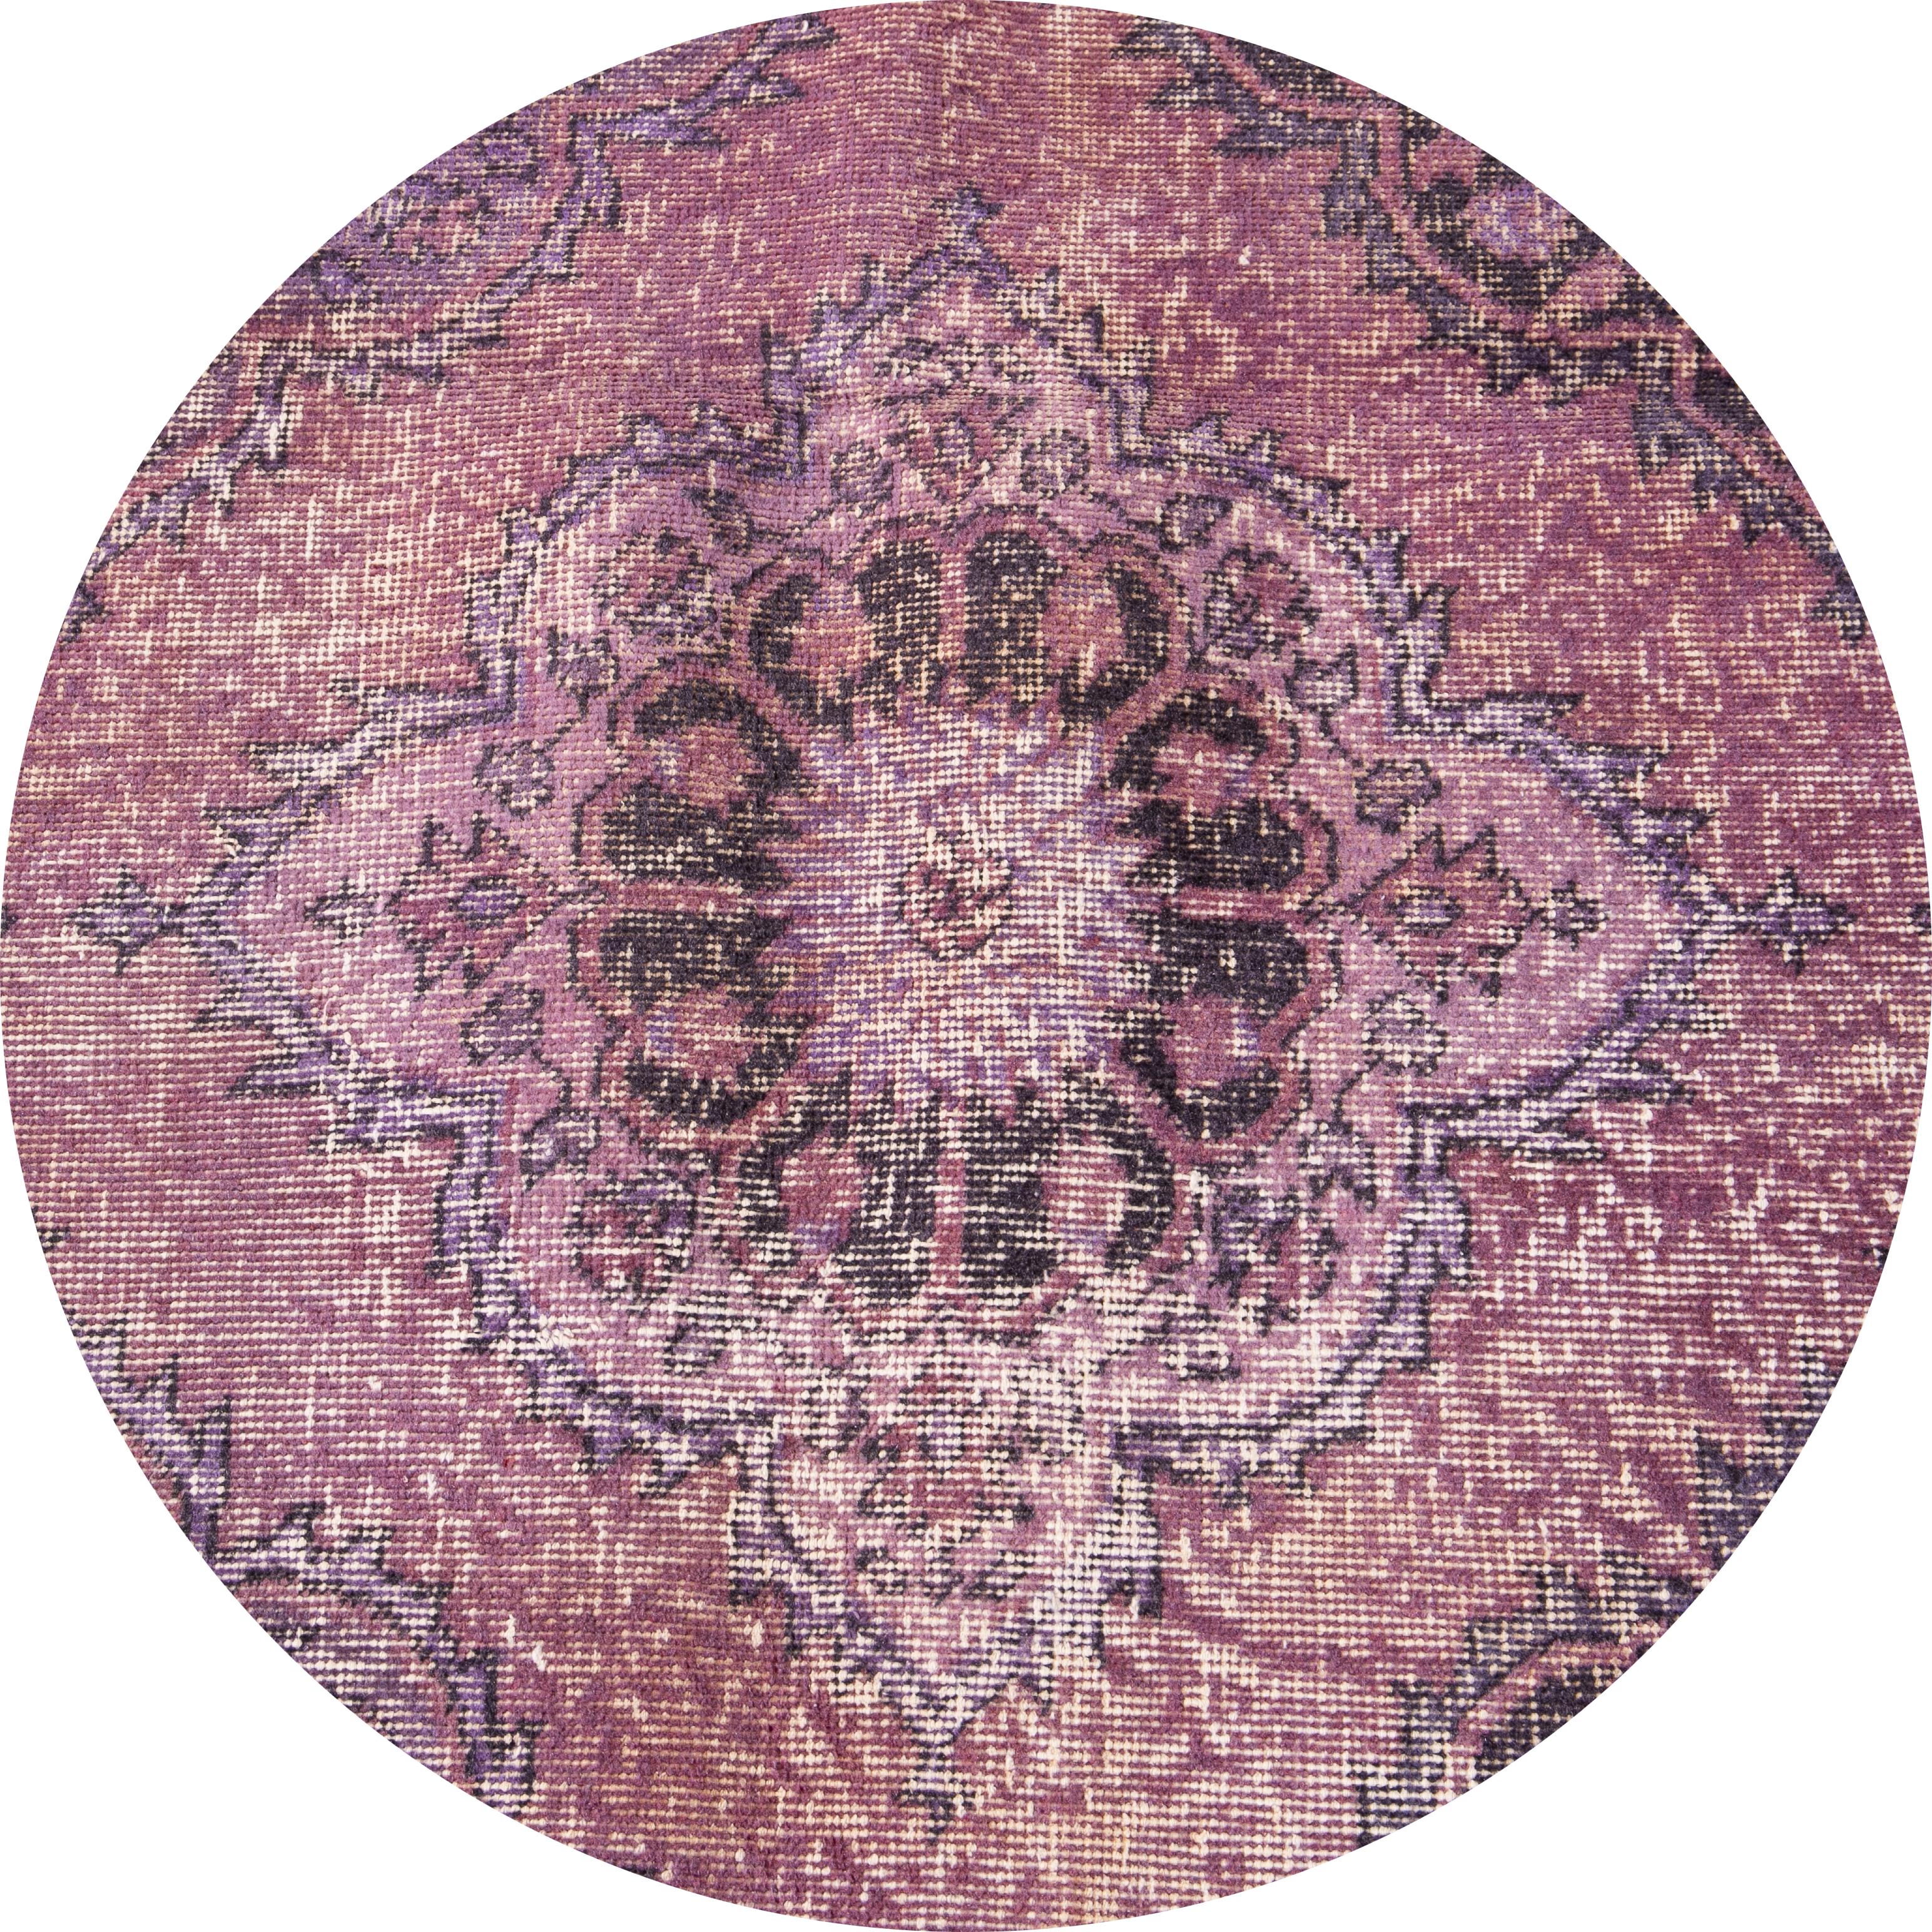 Beautiful Vintage Turkish overdyed runner rug, hand knotted wool with a purple field, pink and brown accents in all-over multi medallion design.
This rug measures 4' 9